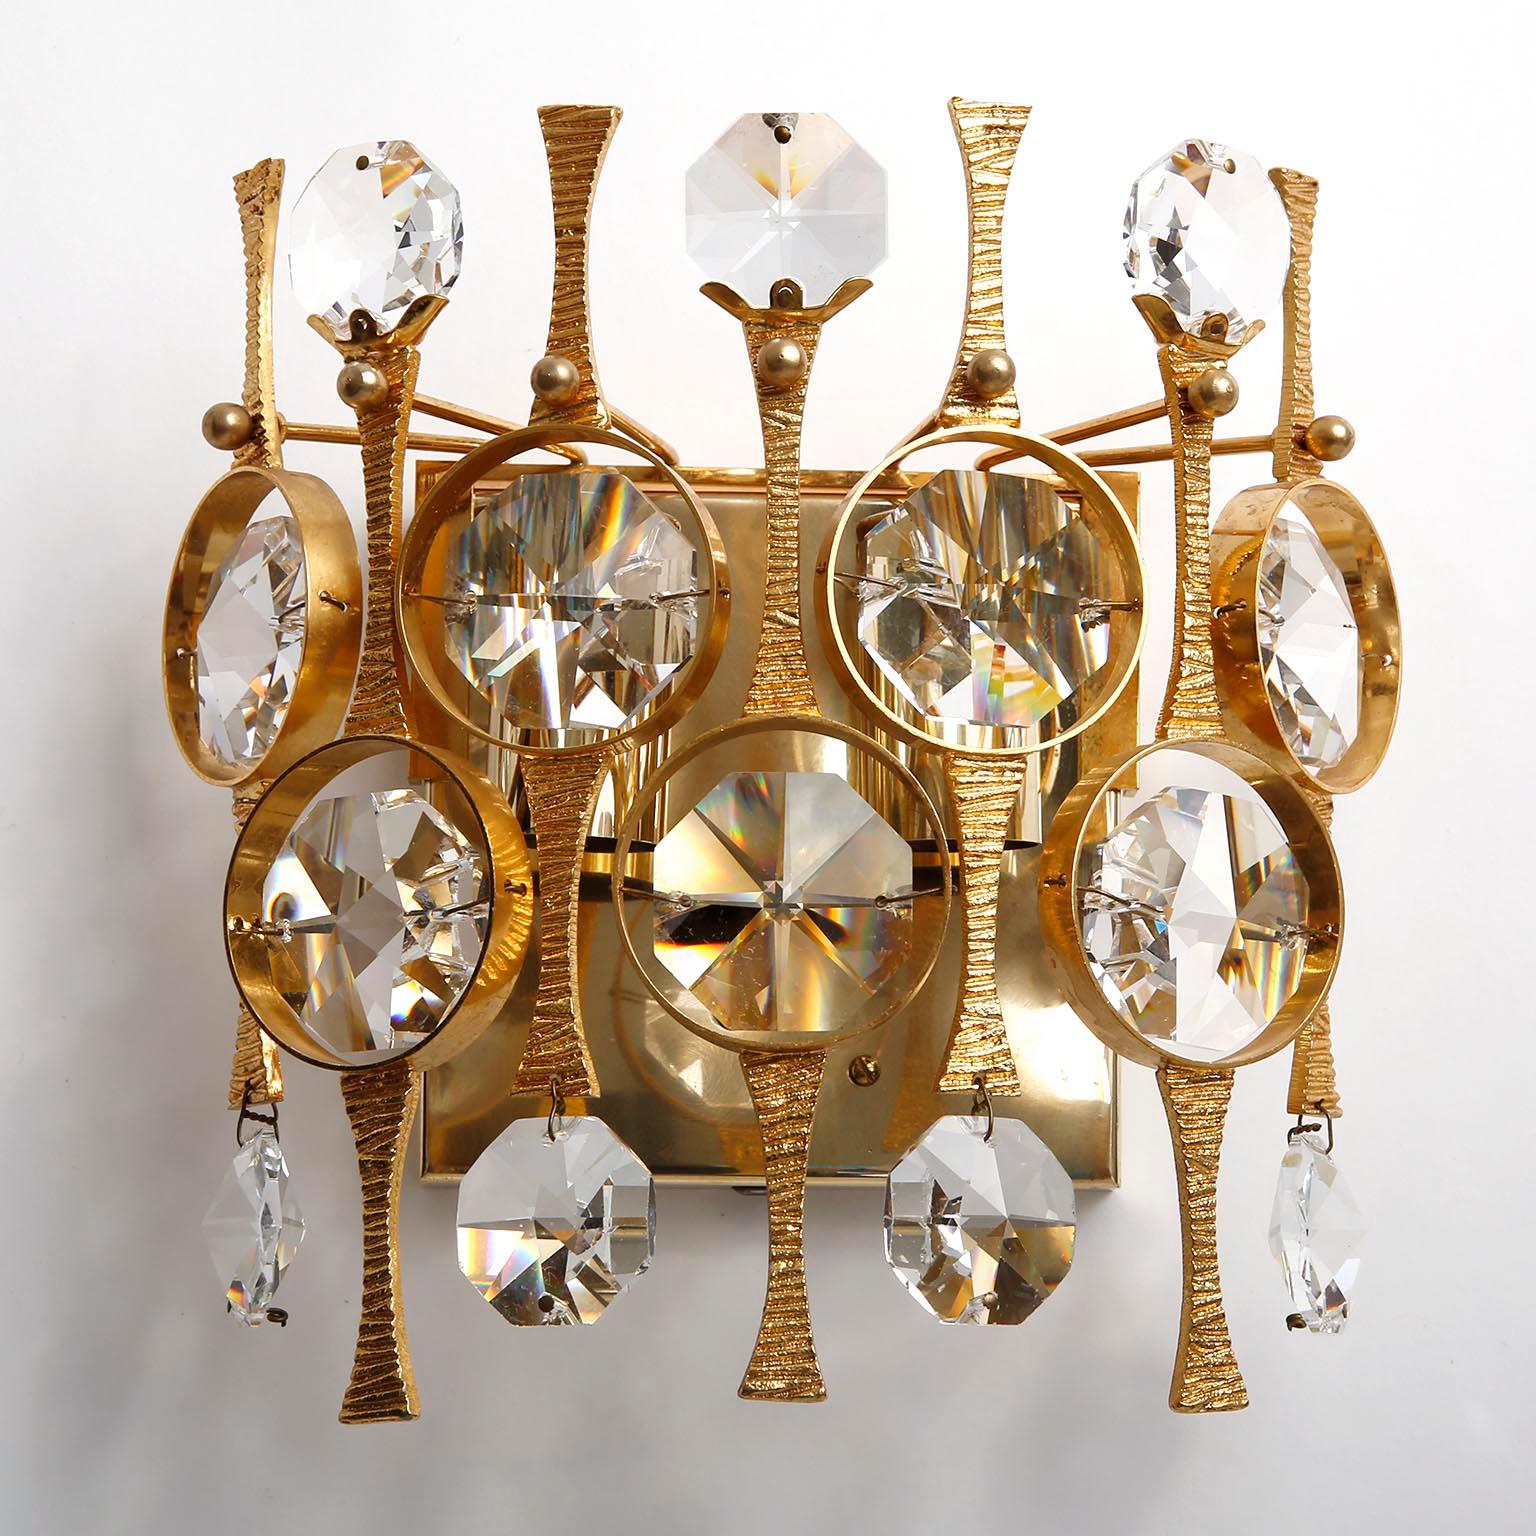 A pair of beautiful wall light fixtures by Palwa (Palme and Walter), Germany, manufactured in midcentury, circa 1970 (late 1960s or early 1970s). They are made of a gilded / gilt / gold-plated brass frame which is decorated with cut crystal glass